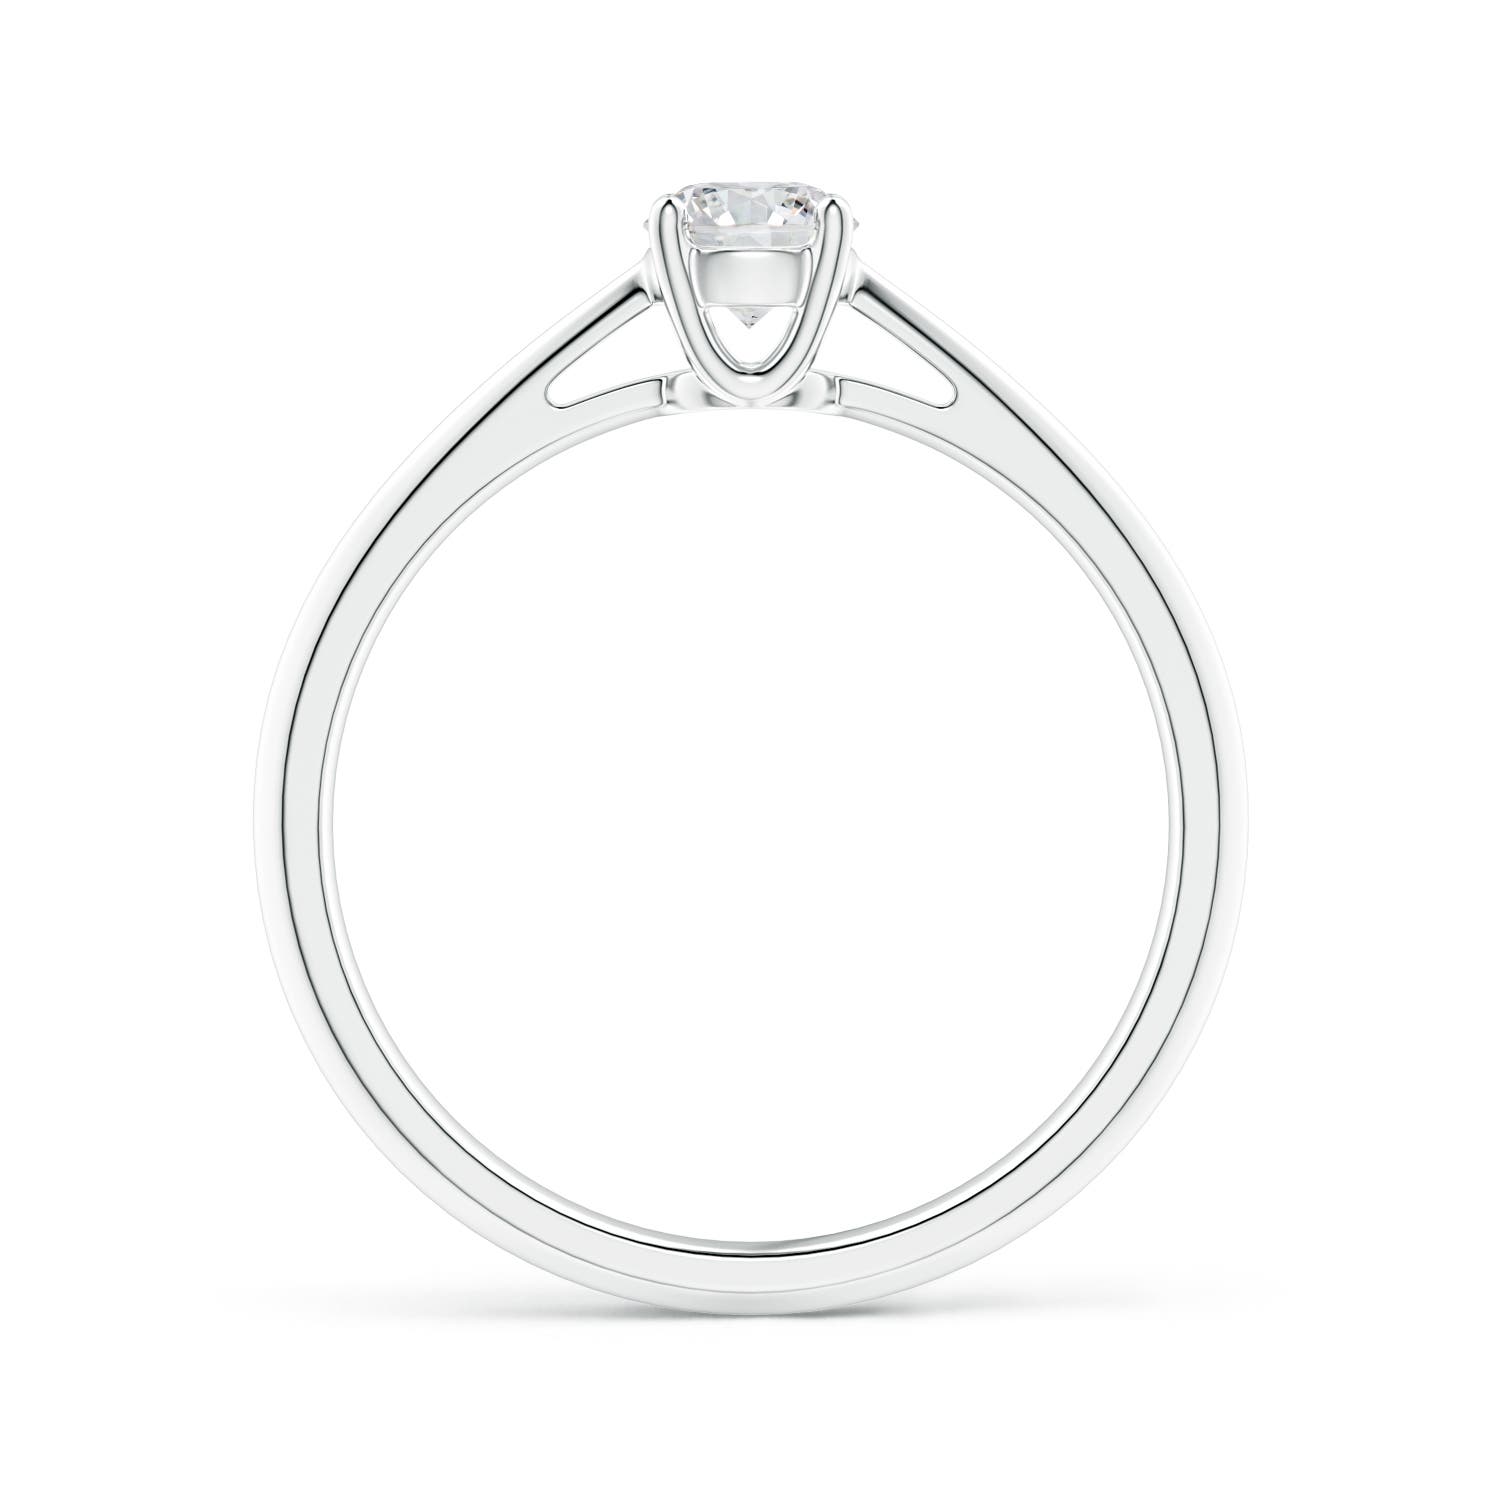 H, SI2 / 0.33 CT / 14 KT White Gold